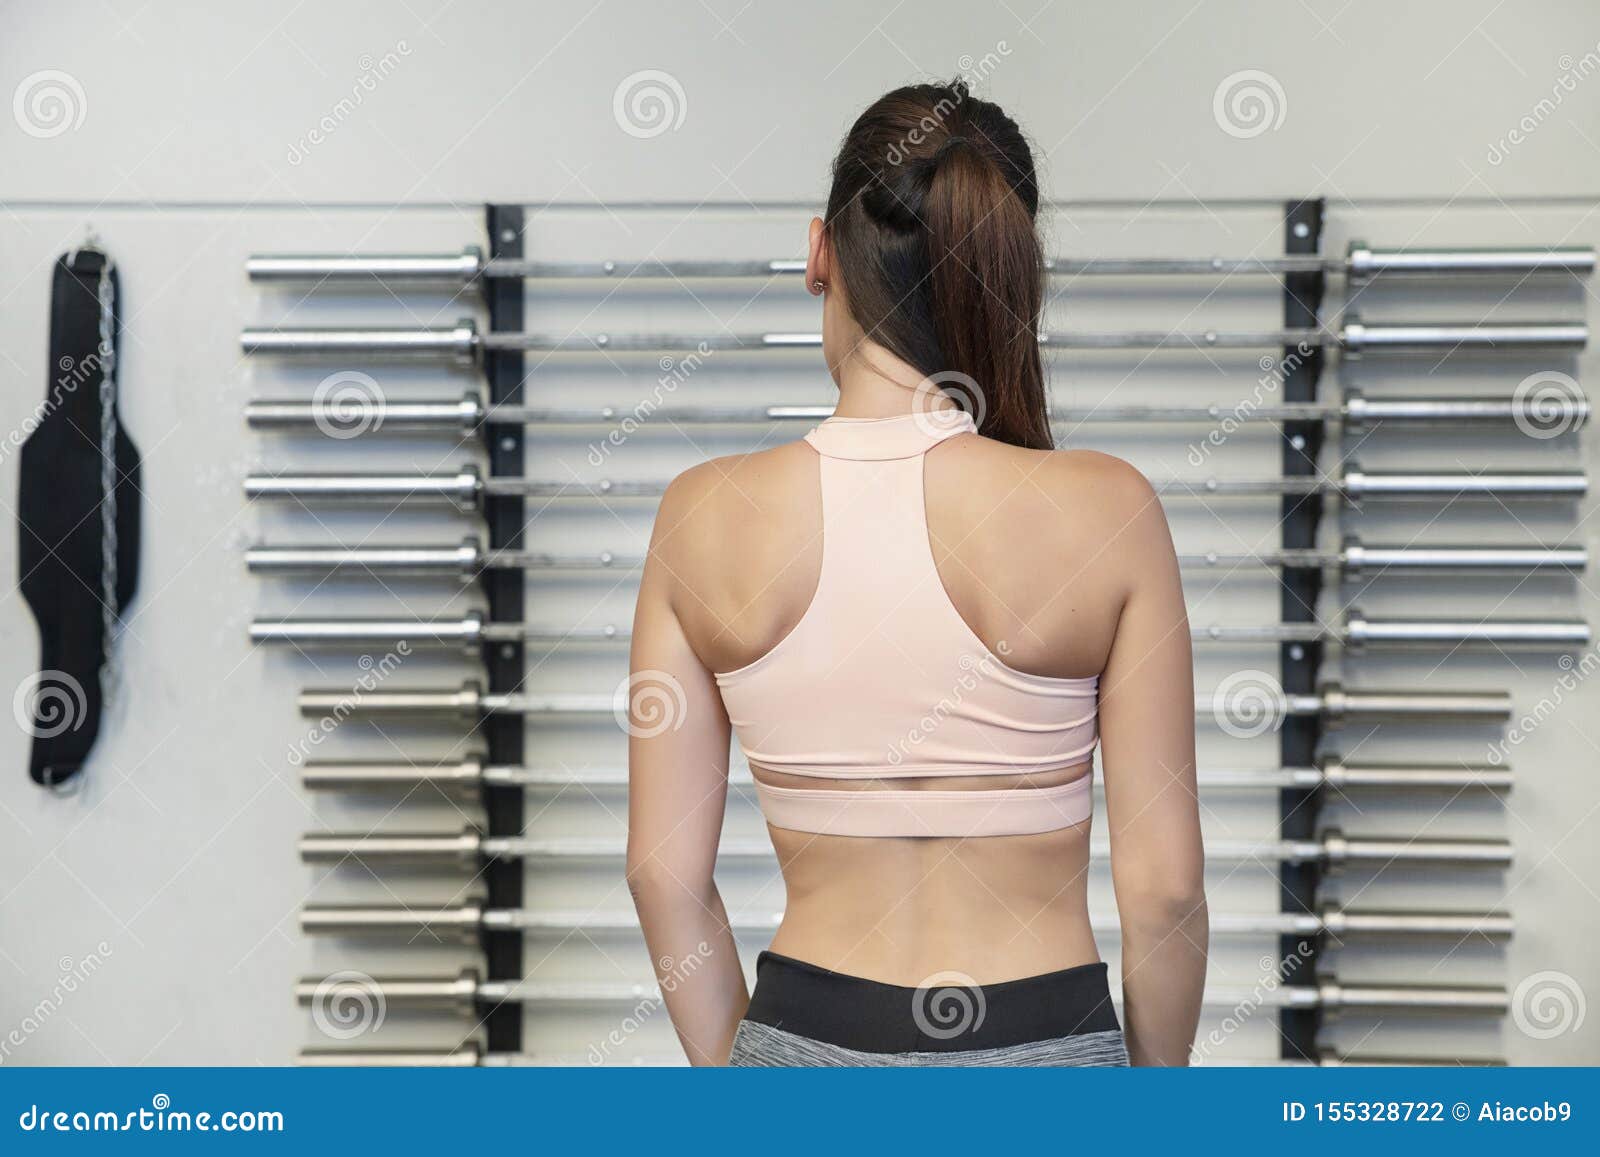 https://thumbs.dreamstime.com/z/young-caucasian-woman-showing-her-toned-defined-back-gym-fitness-studio-fat-burning-muscle-defining-155328722.jpg